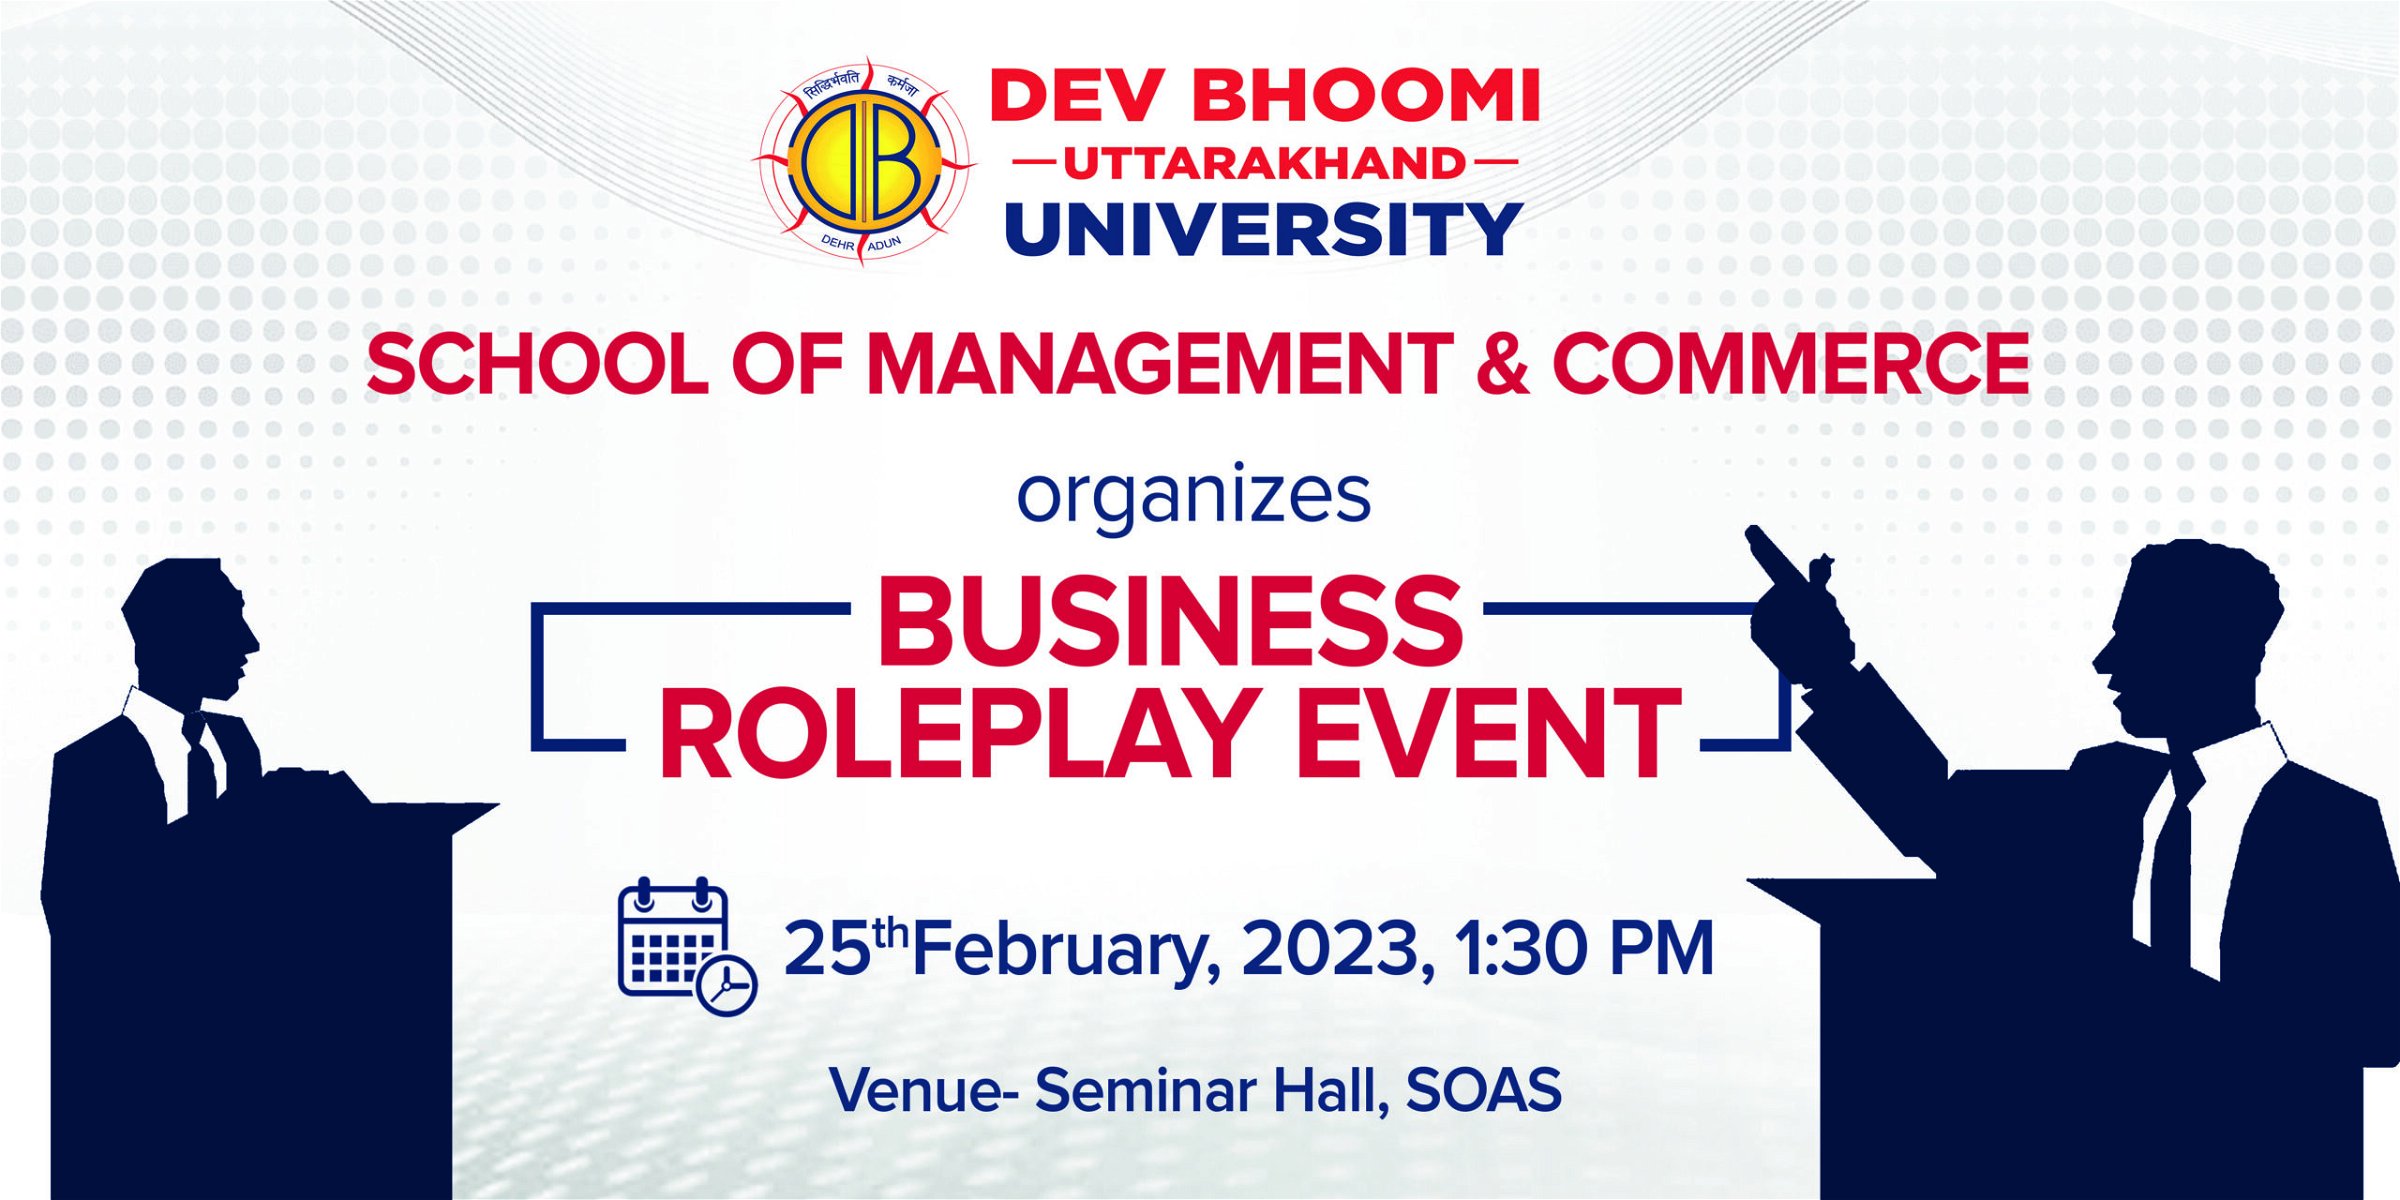 BUSINESS ROLEPLAY EVENT